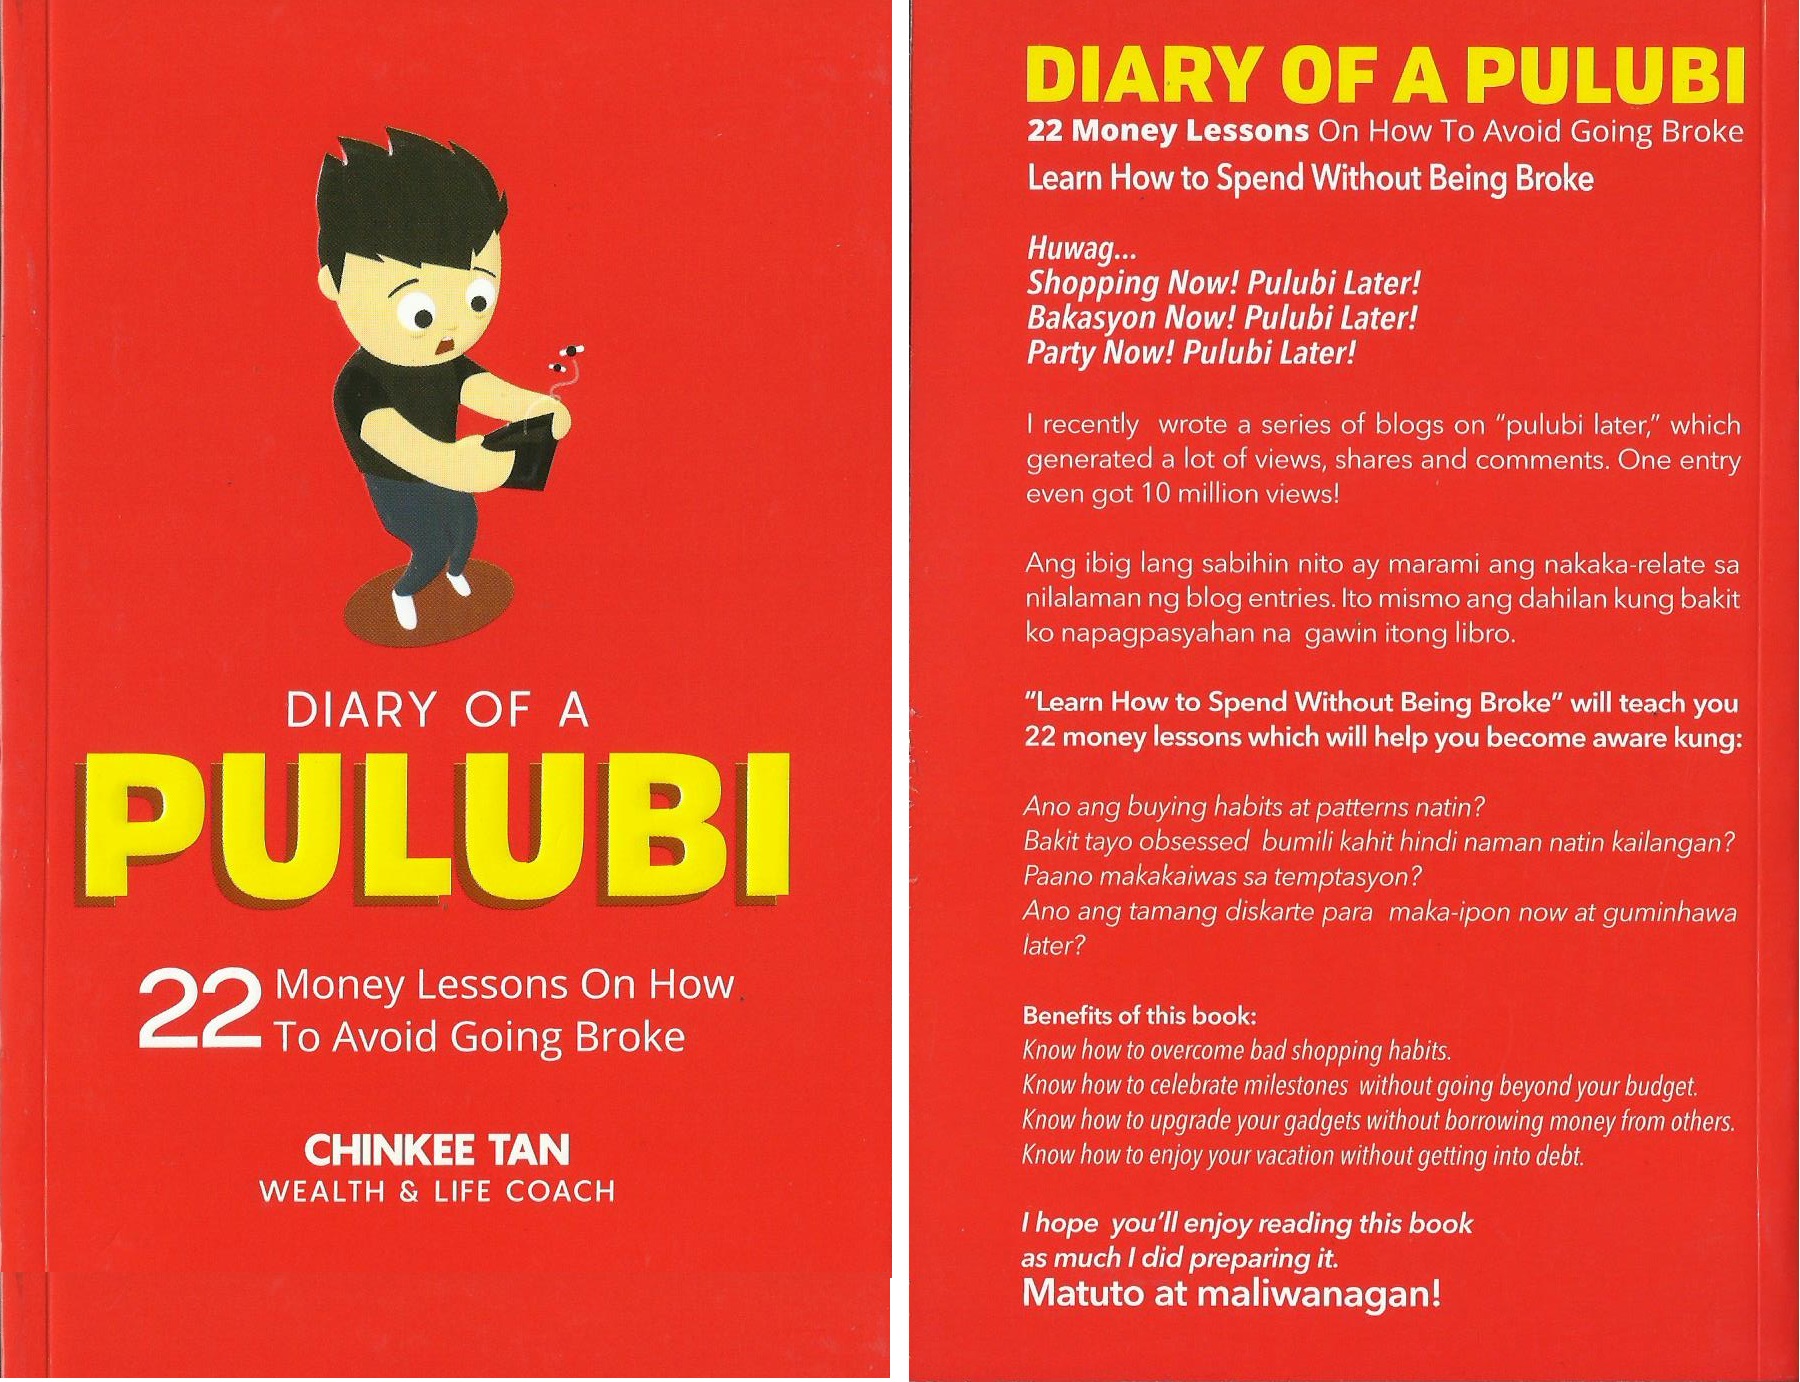 Diary of a PULUBI